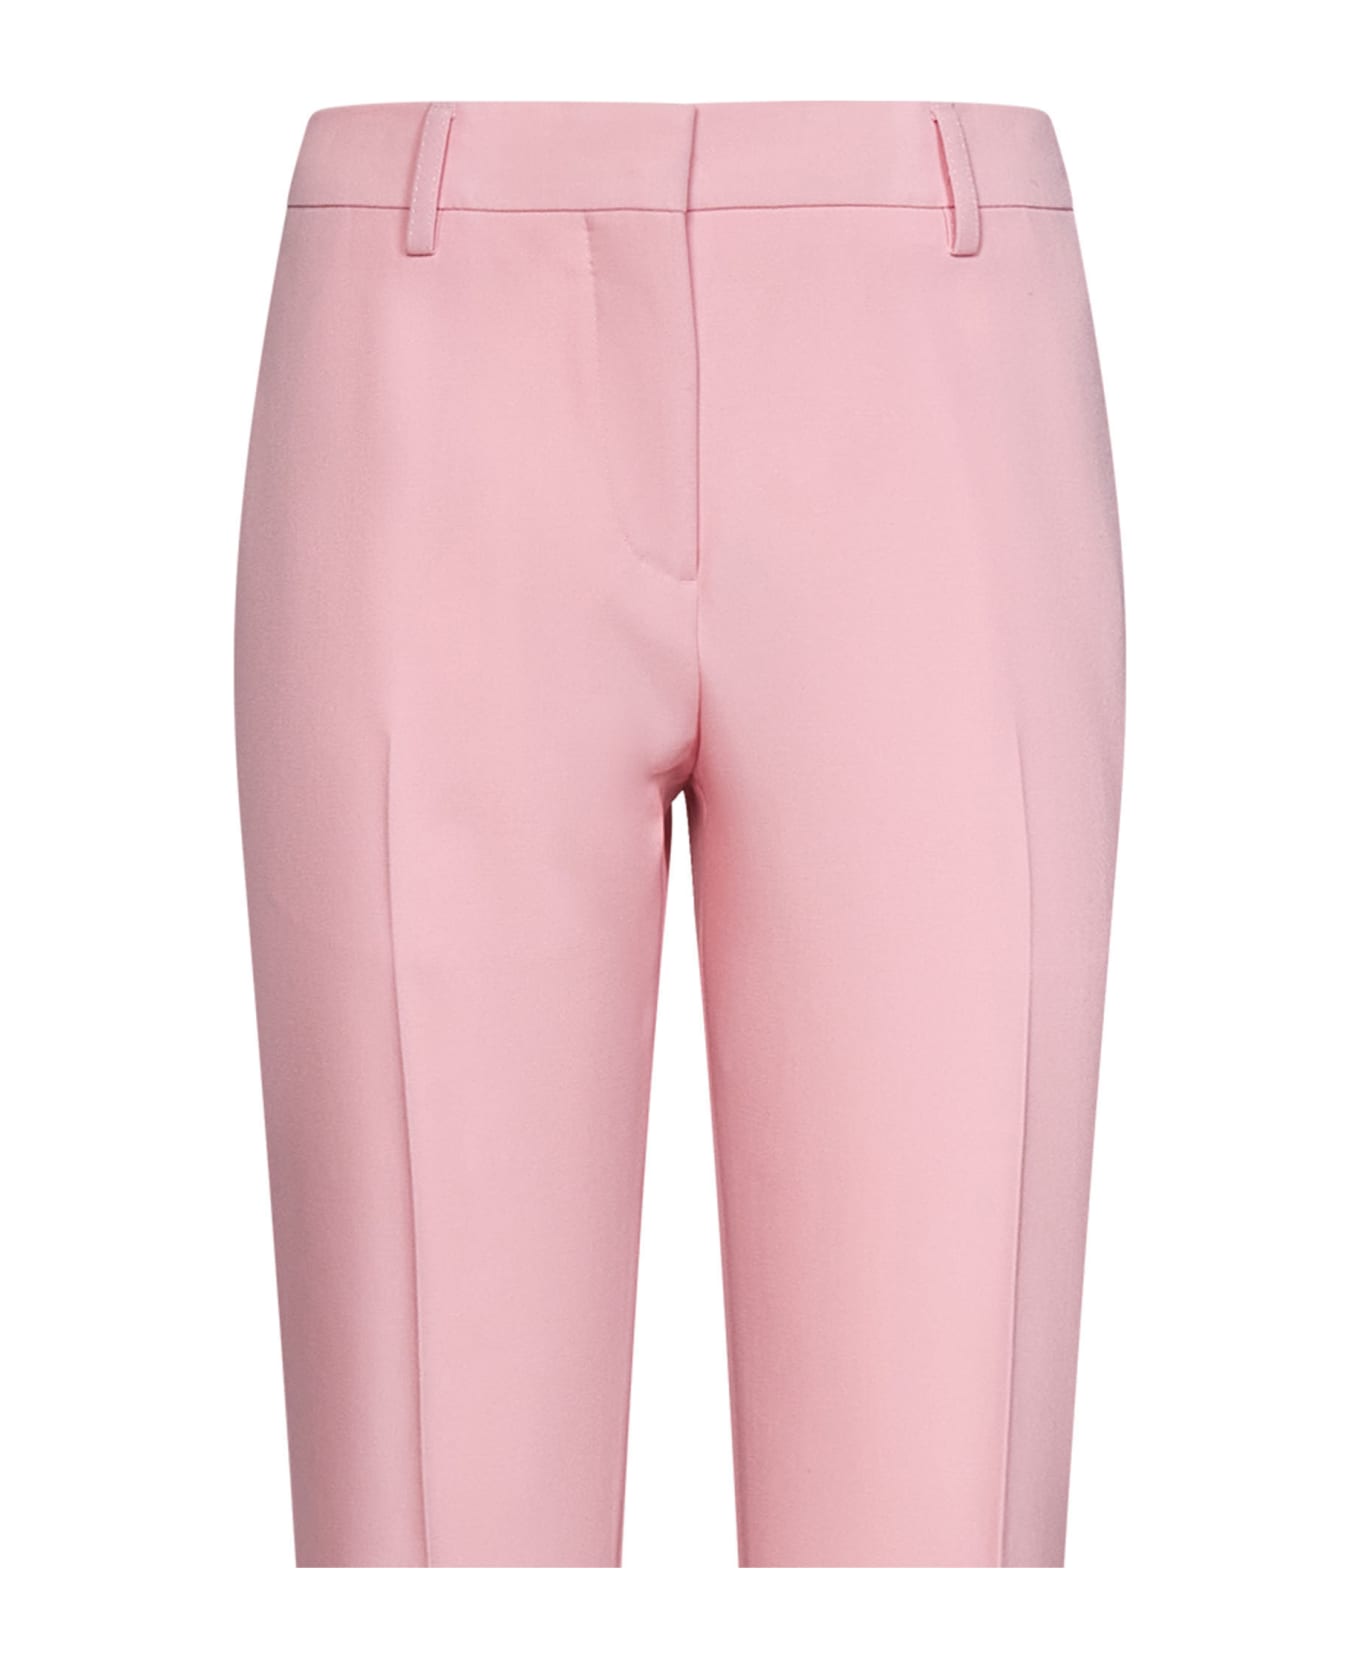 Burberry Aimie Pant - Pink